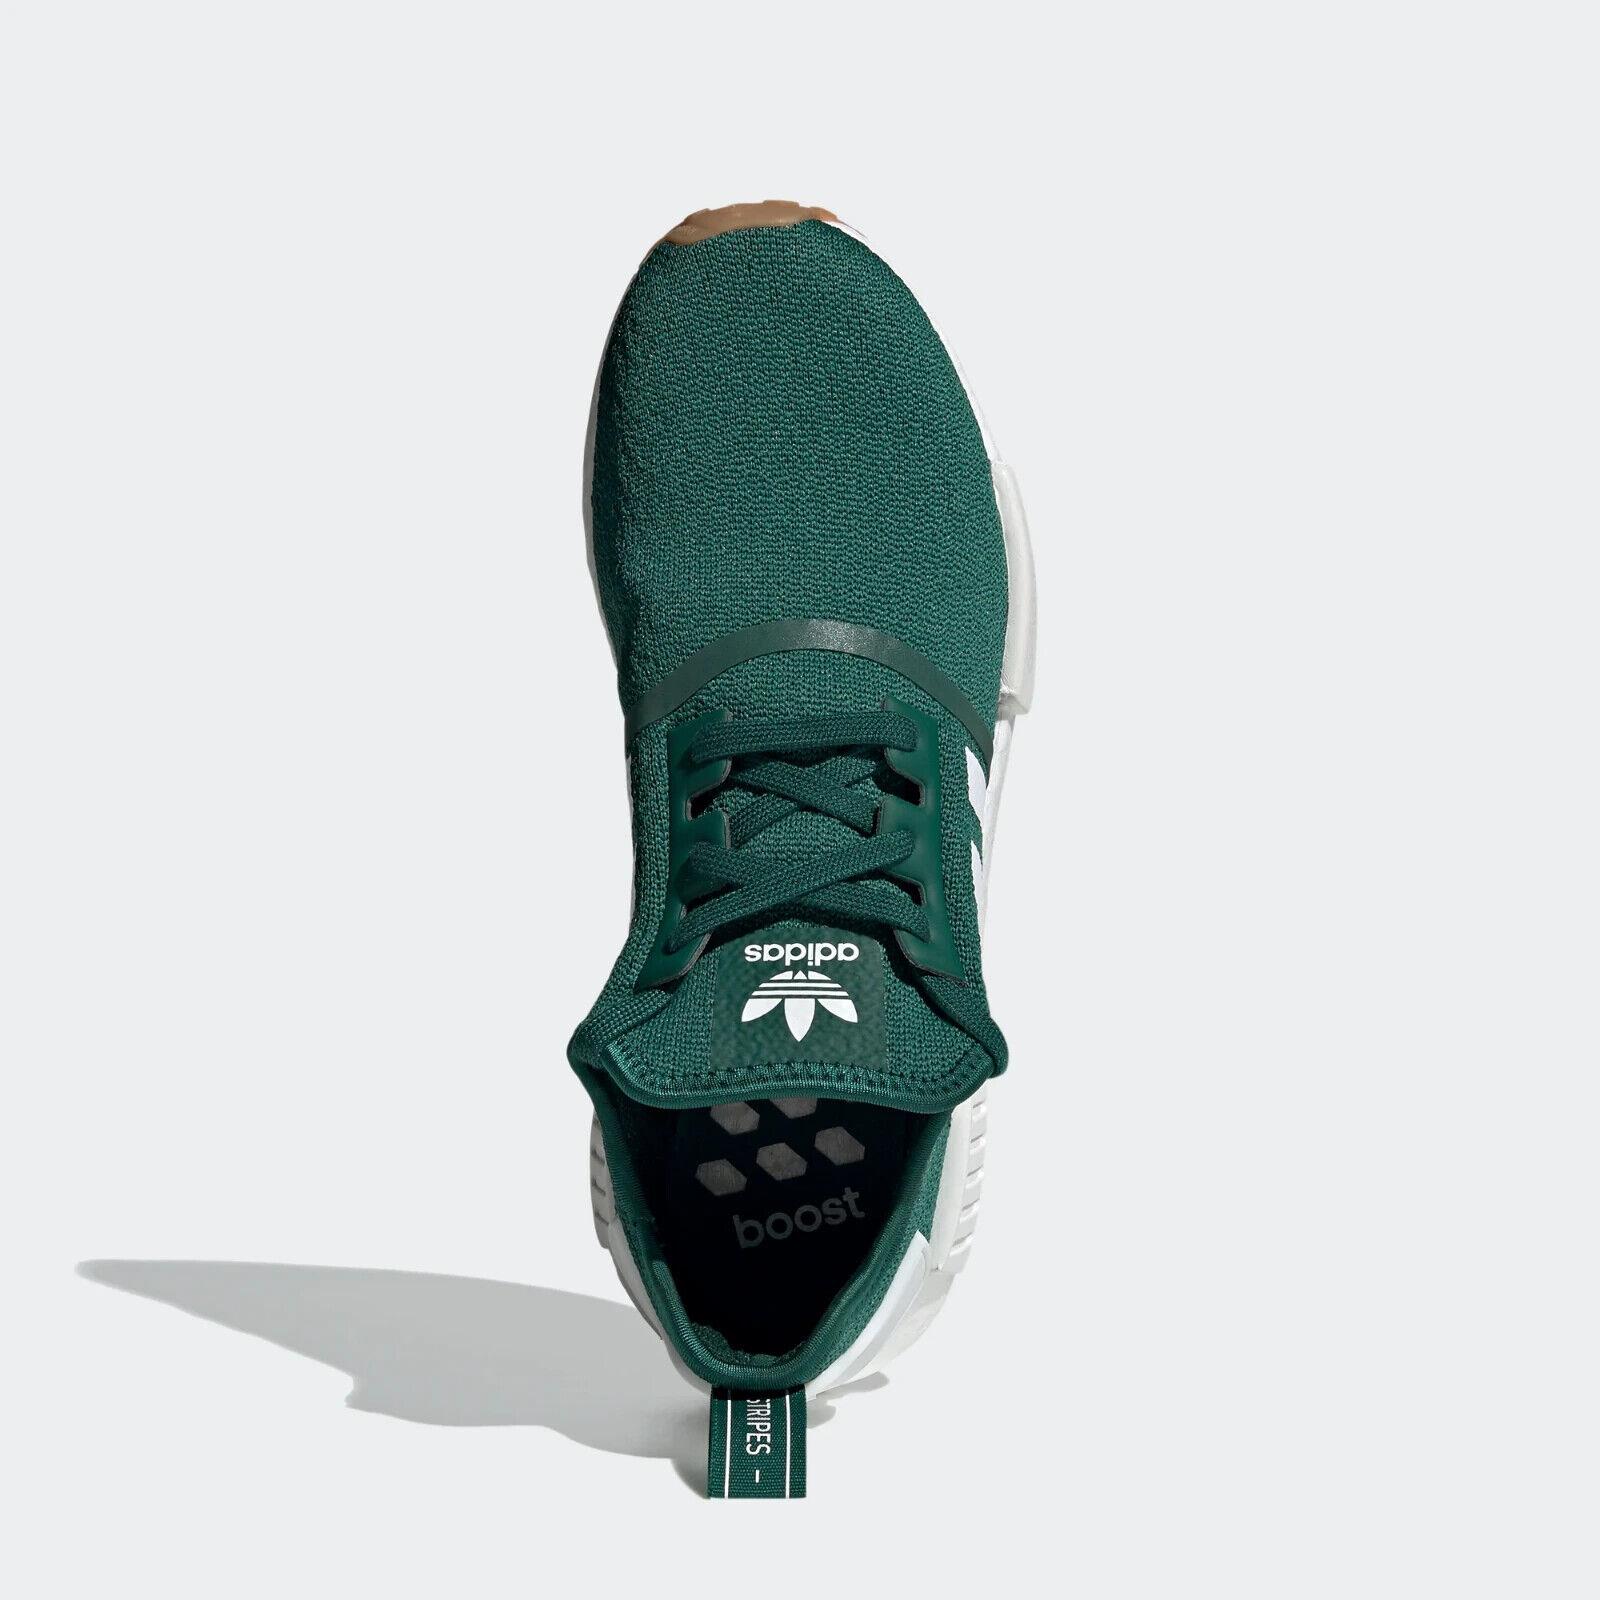 Adidas shoes NMD - Green 3